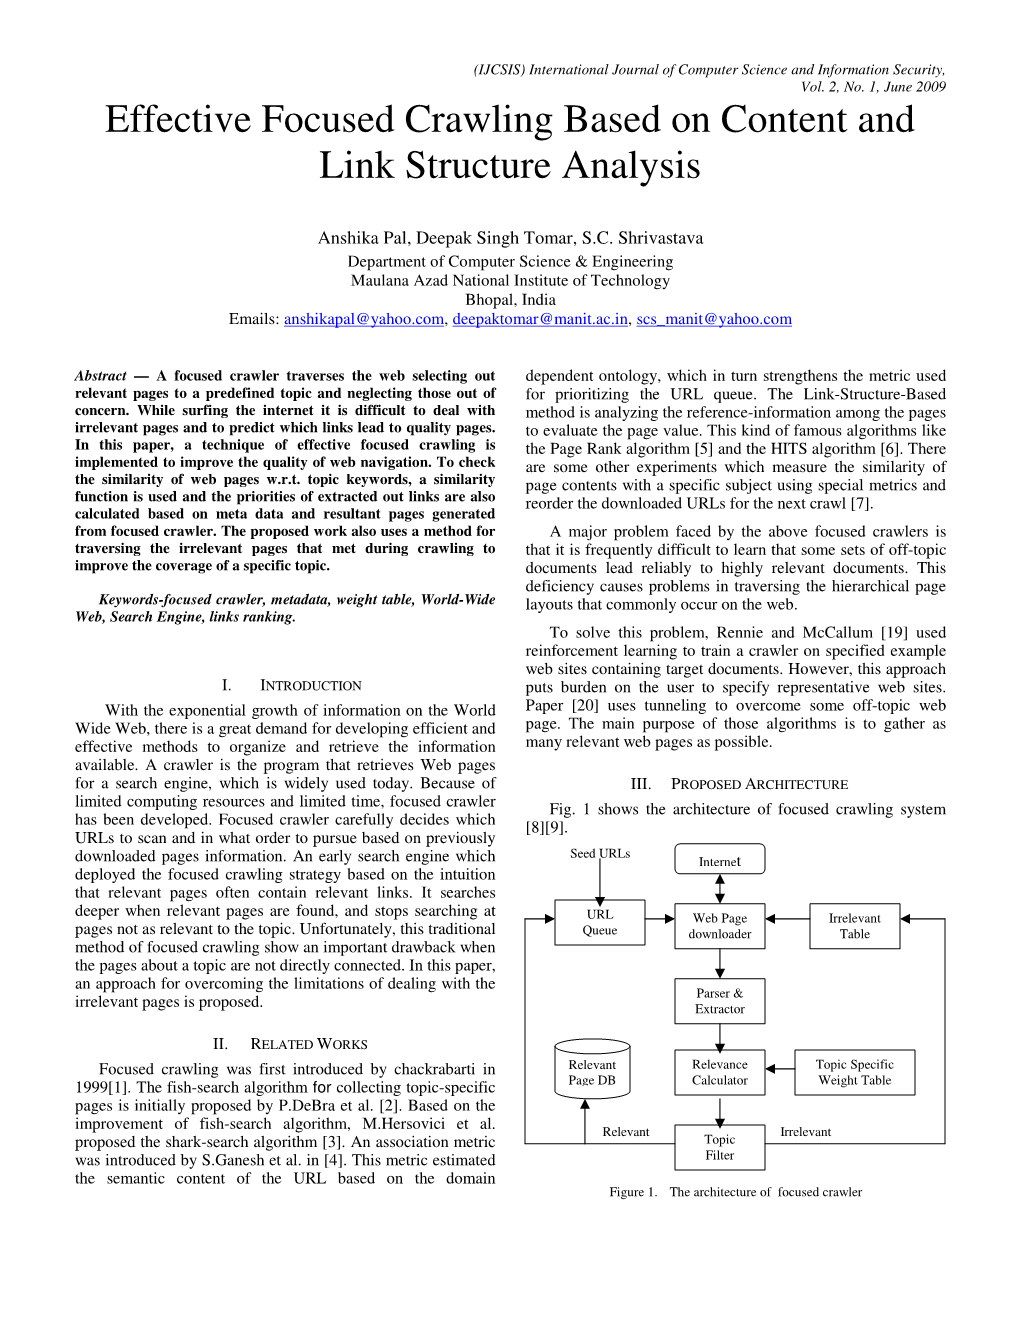 Effective Focused Crawling Based on Content and Link Structure Analysis